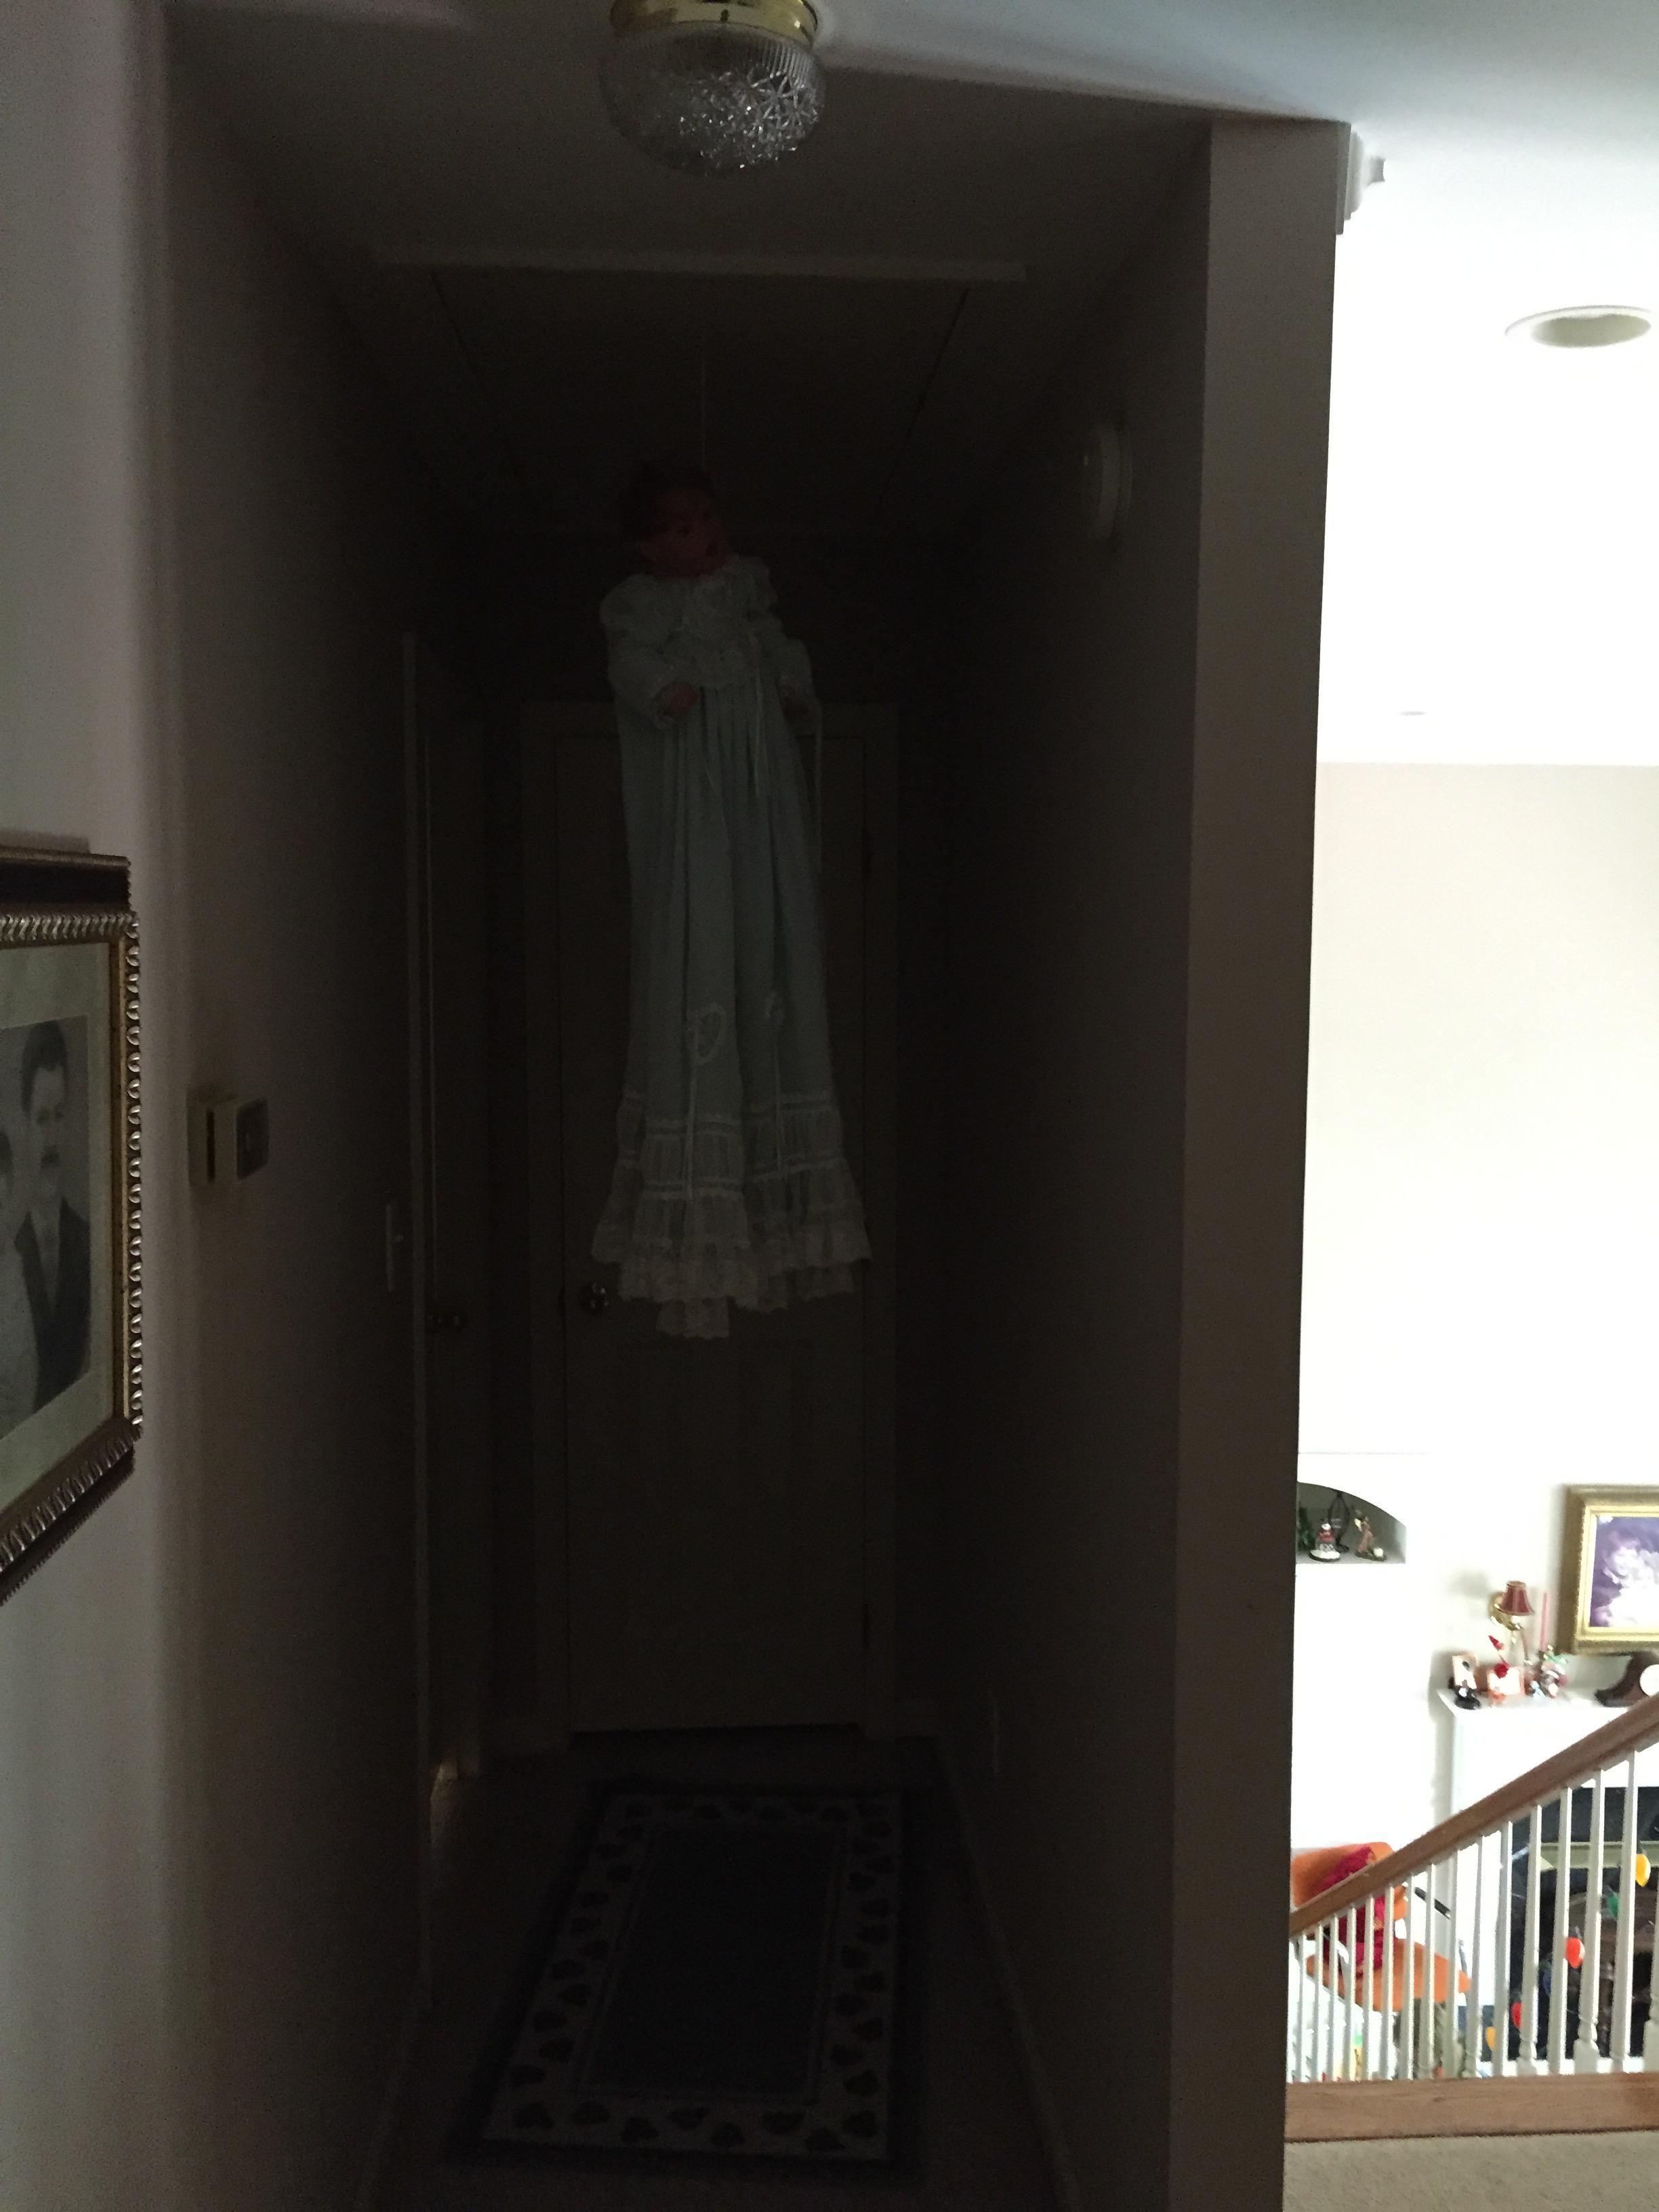 25 Images That Are Creepy As F*CK